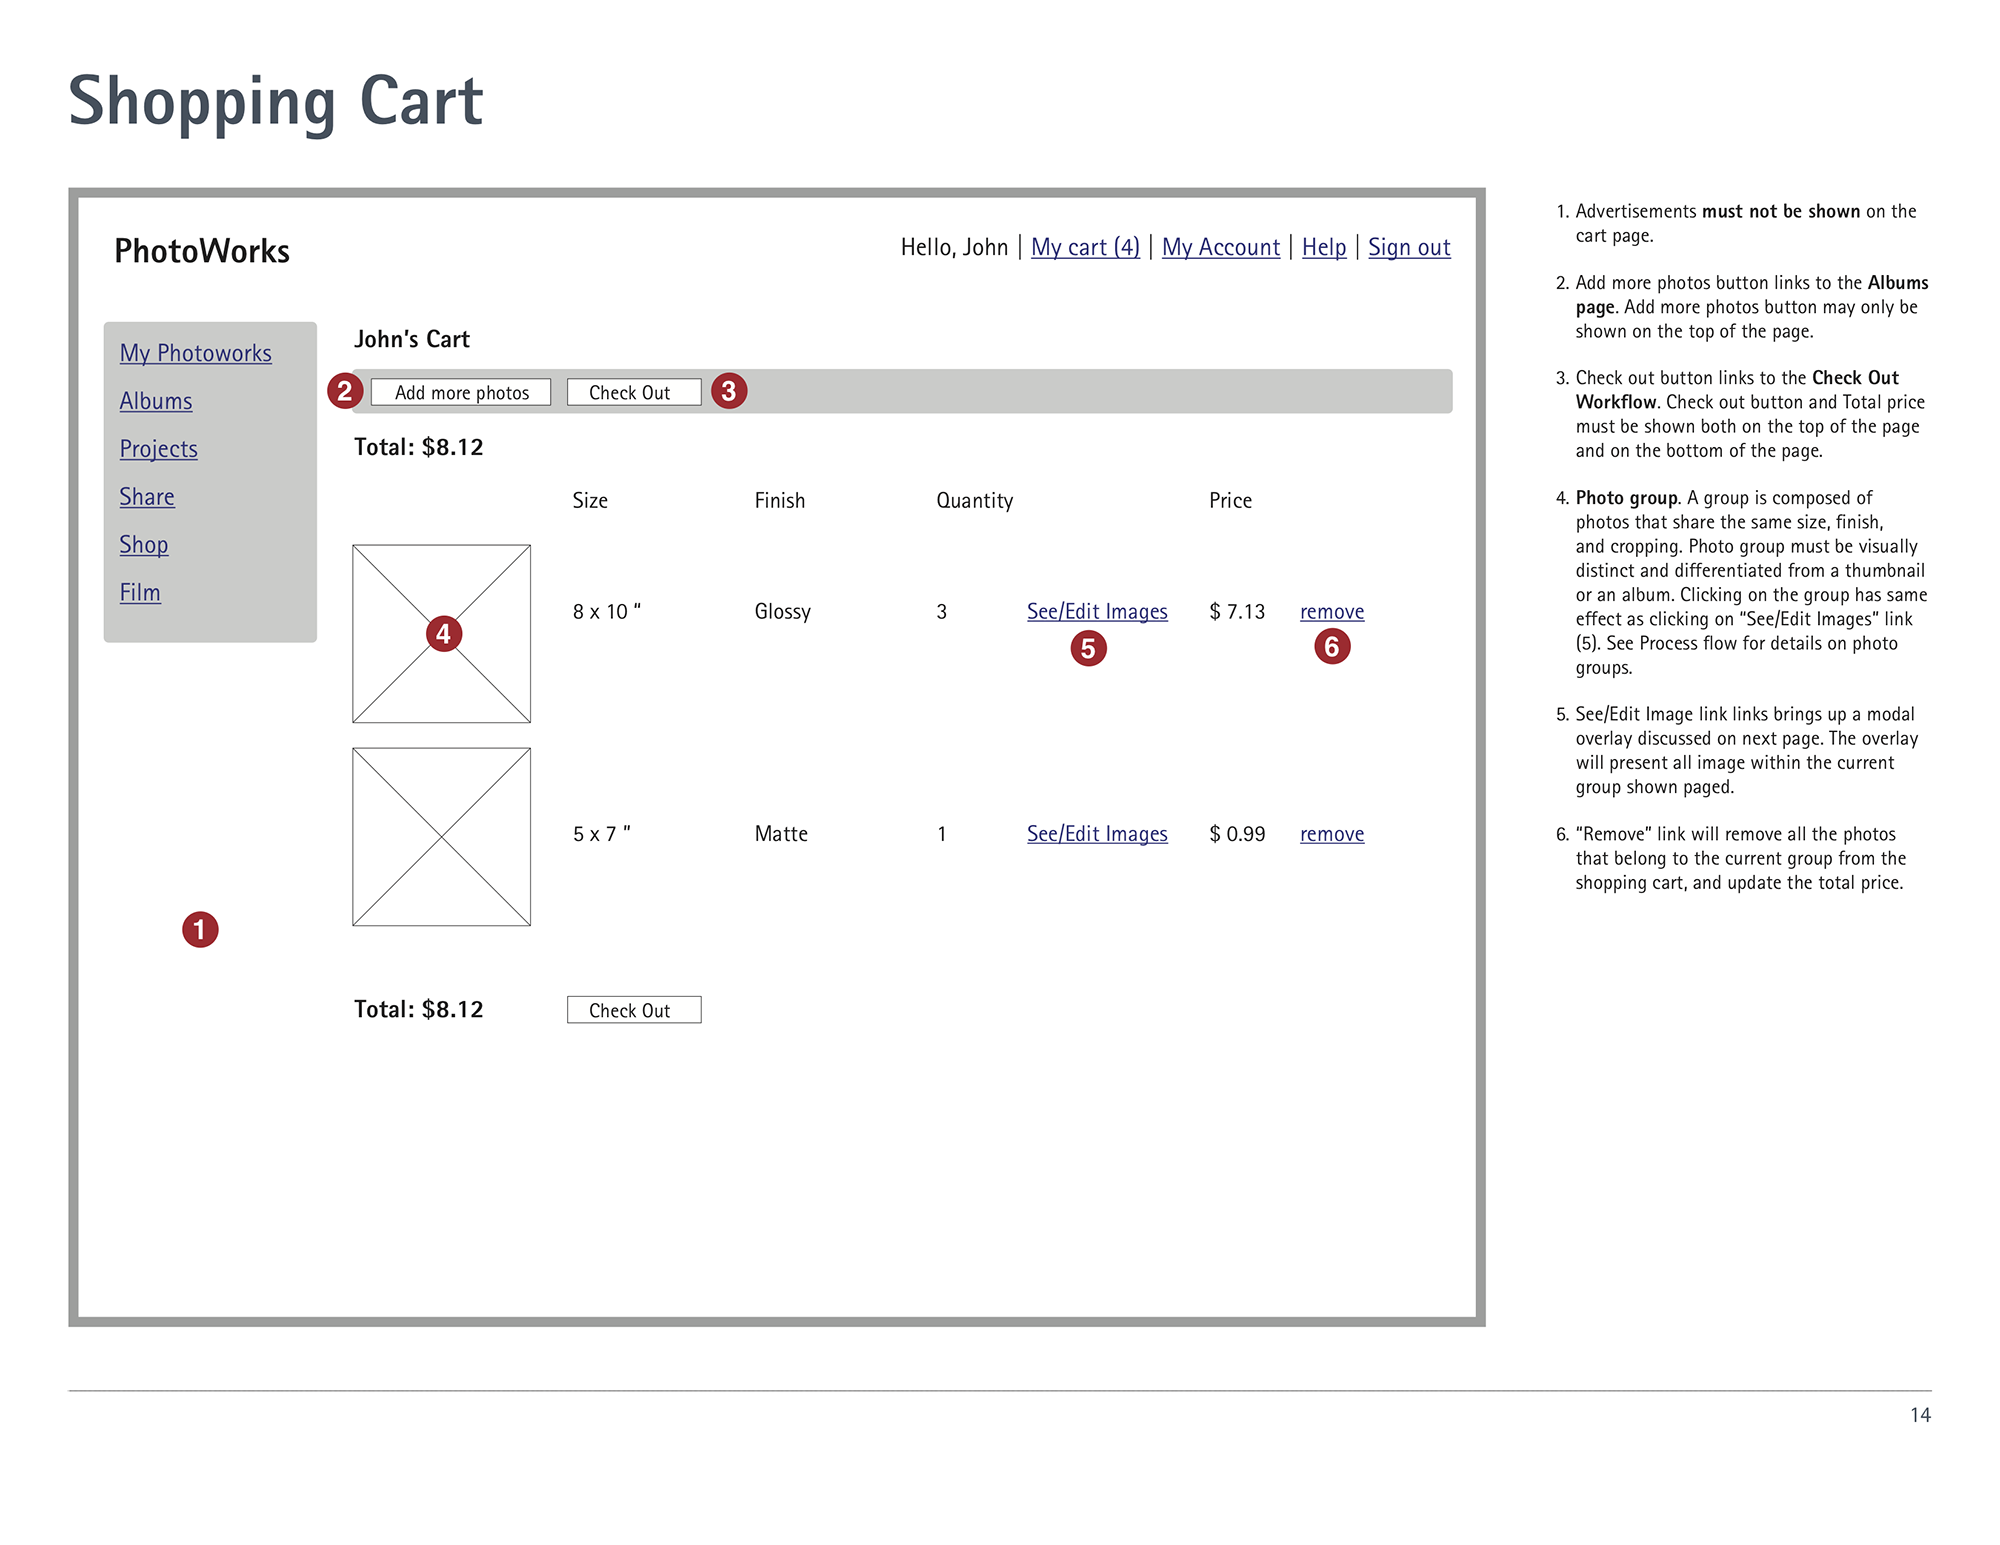 Wireframe for the shopping cart